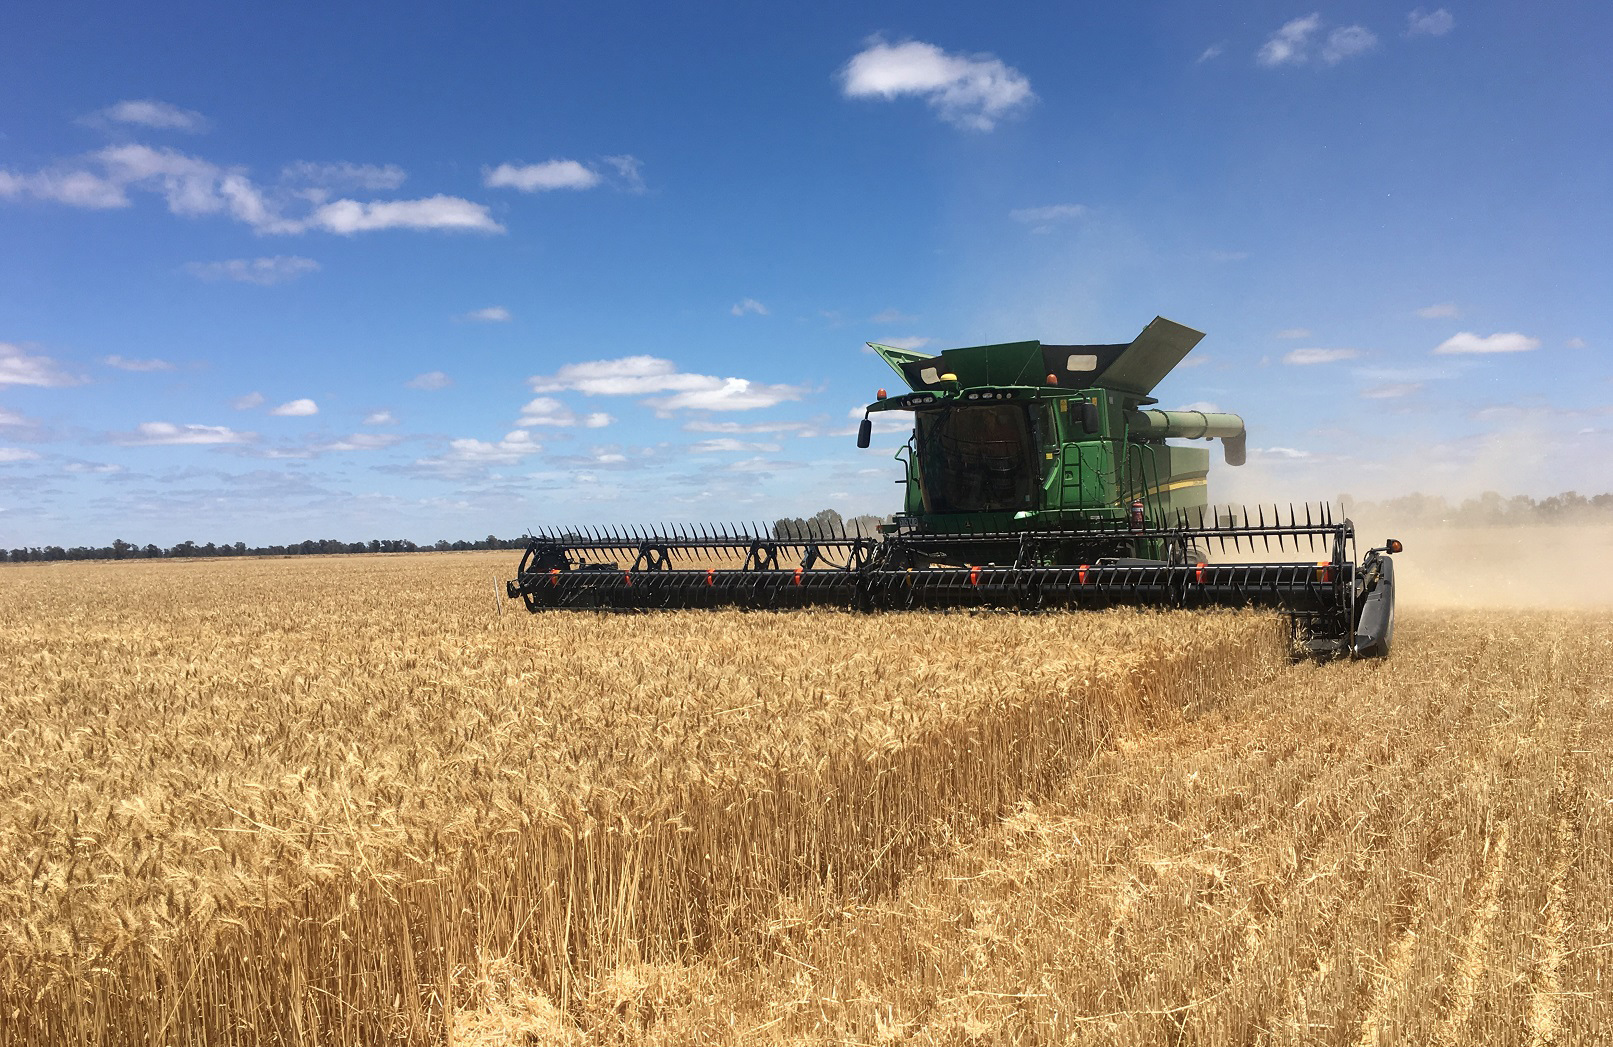 wheat harvesting in a field of wheat